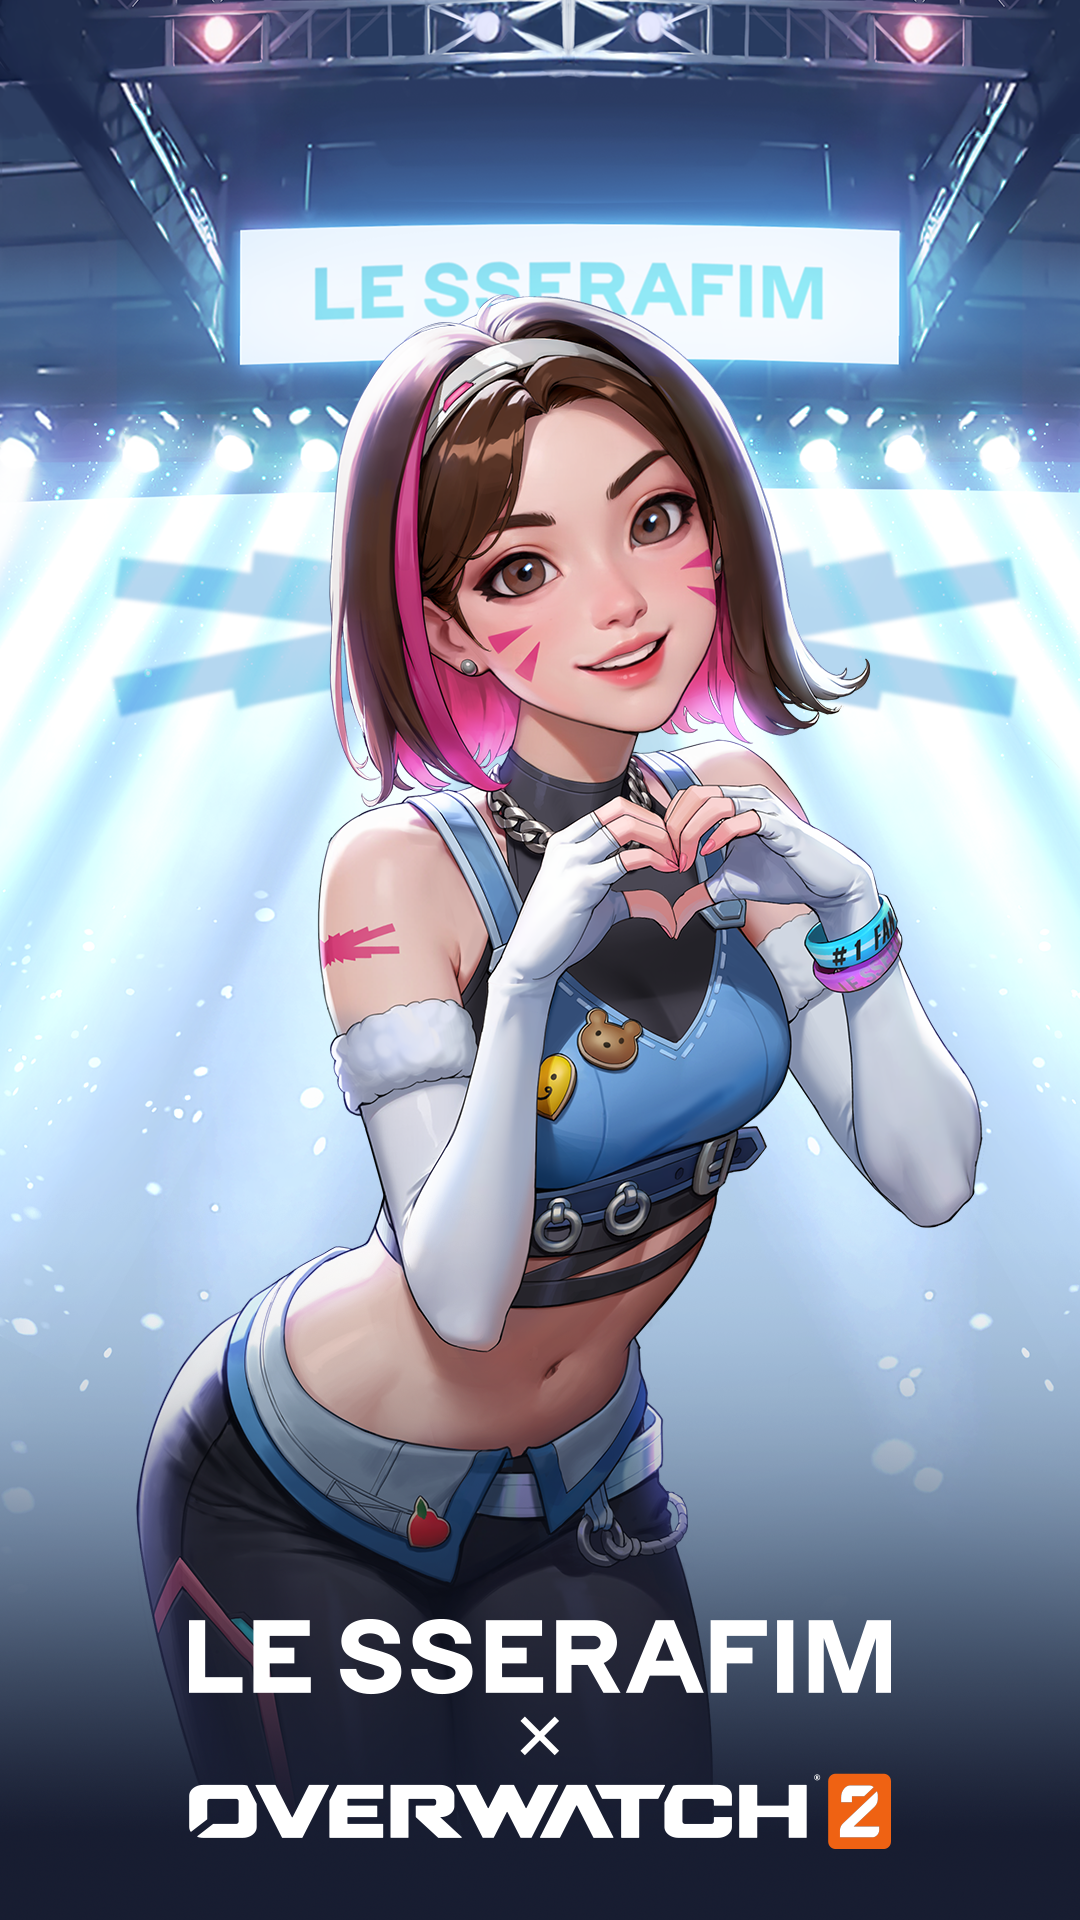 Overwatch 2 themed phone wallpaper featuring the animated character D.Va making a heart shape with her hands, with the text LE SSERAFIM x OVERWATCH 2 displayed at the bottom.